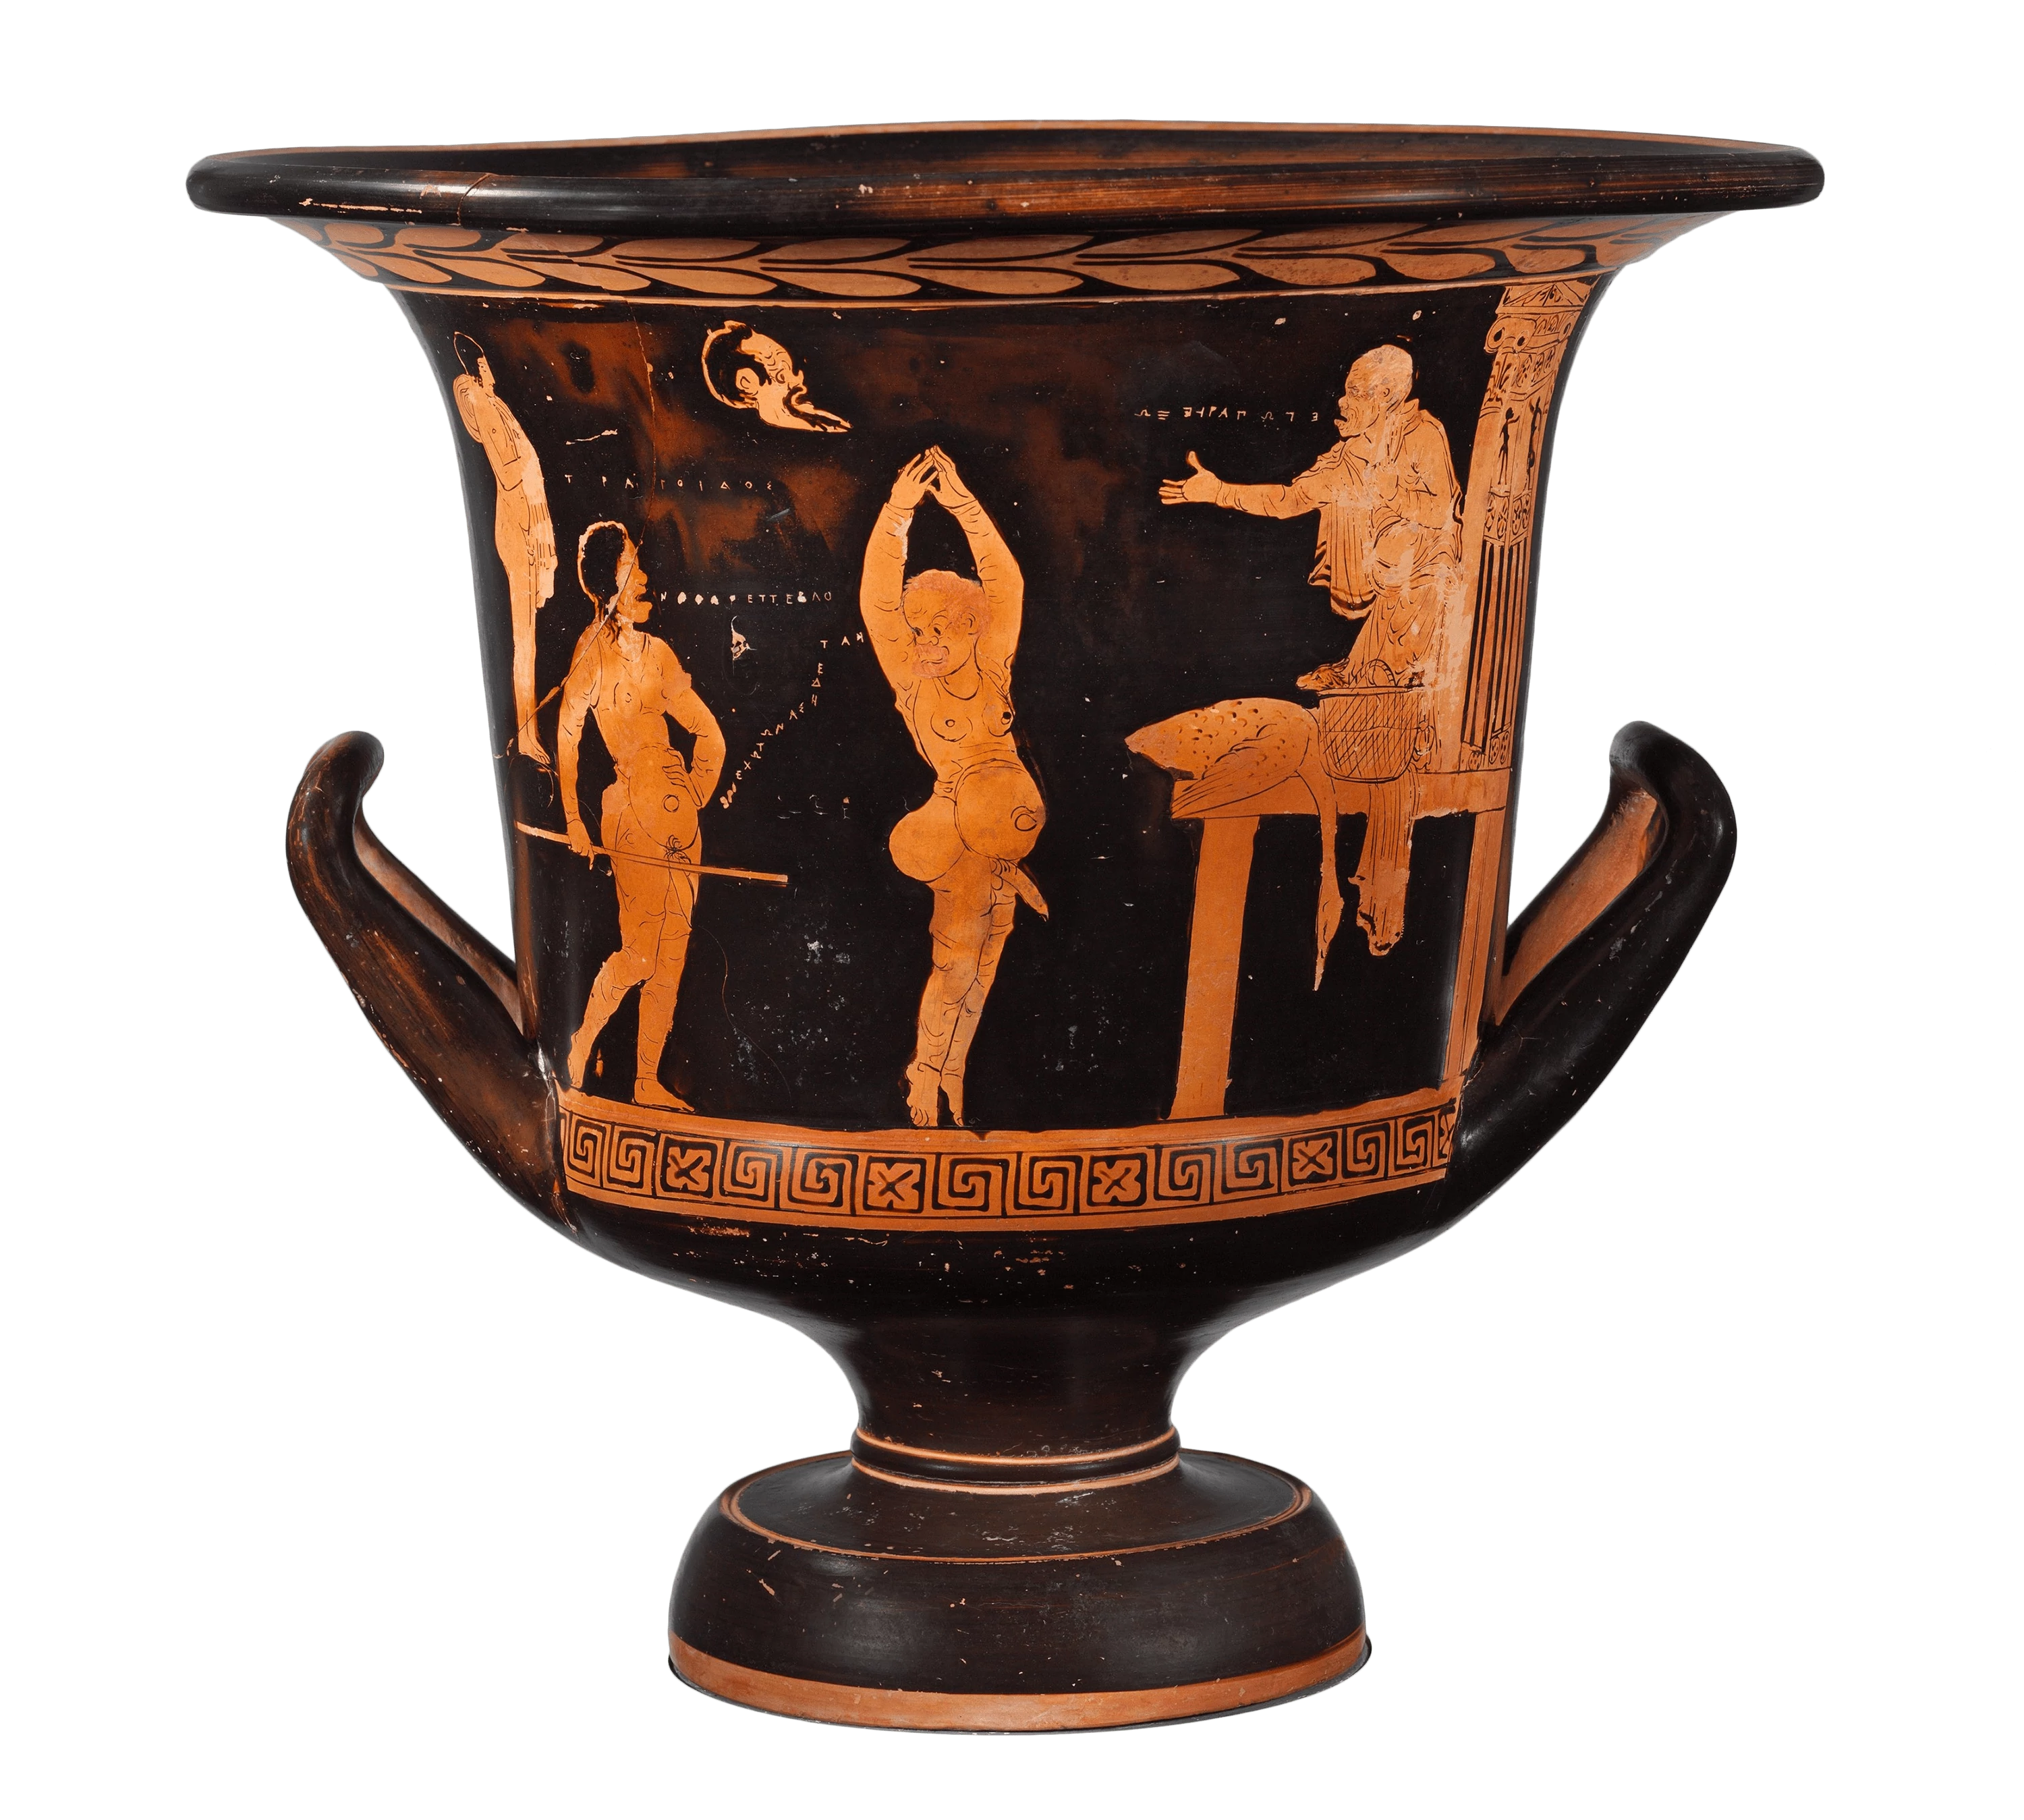 Terracotta calyx-krater, Ancient Greece